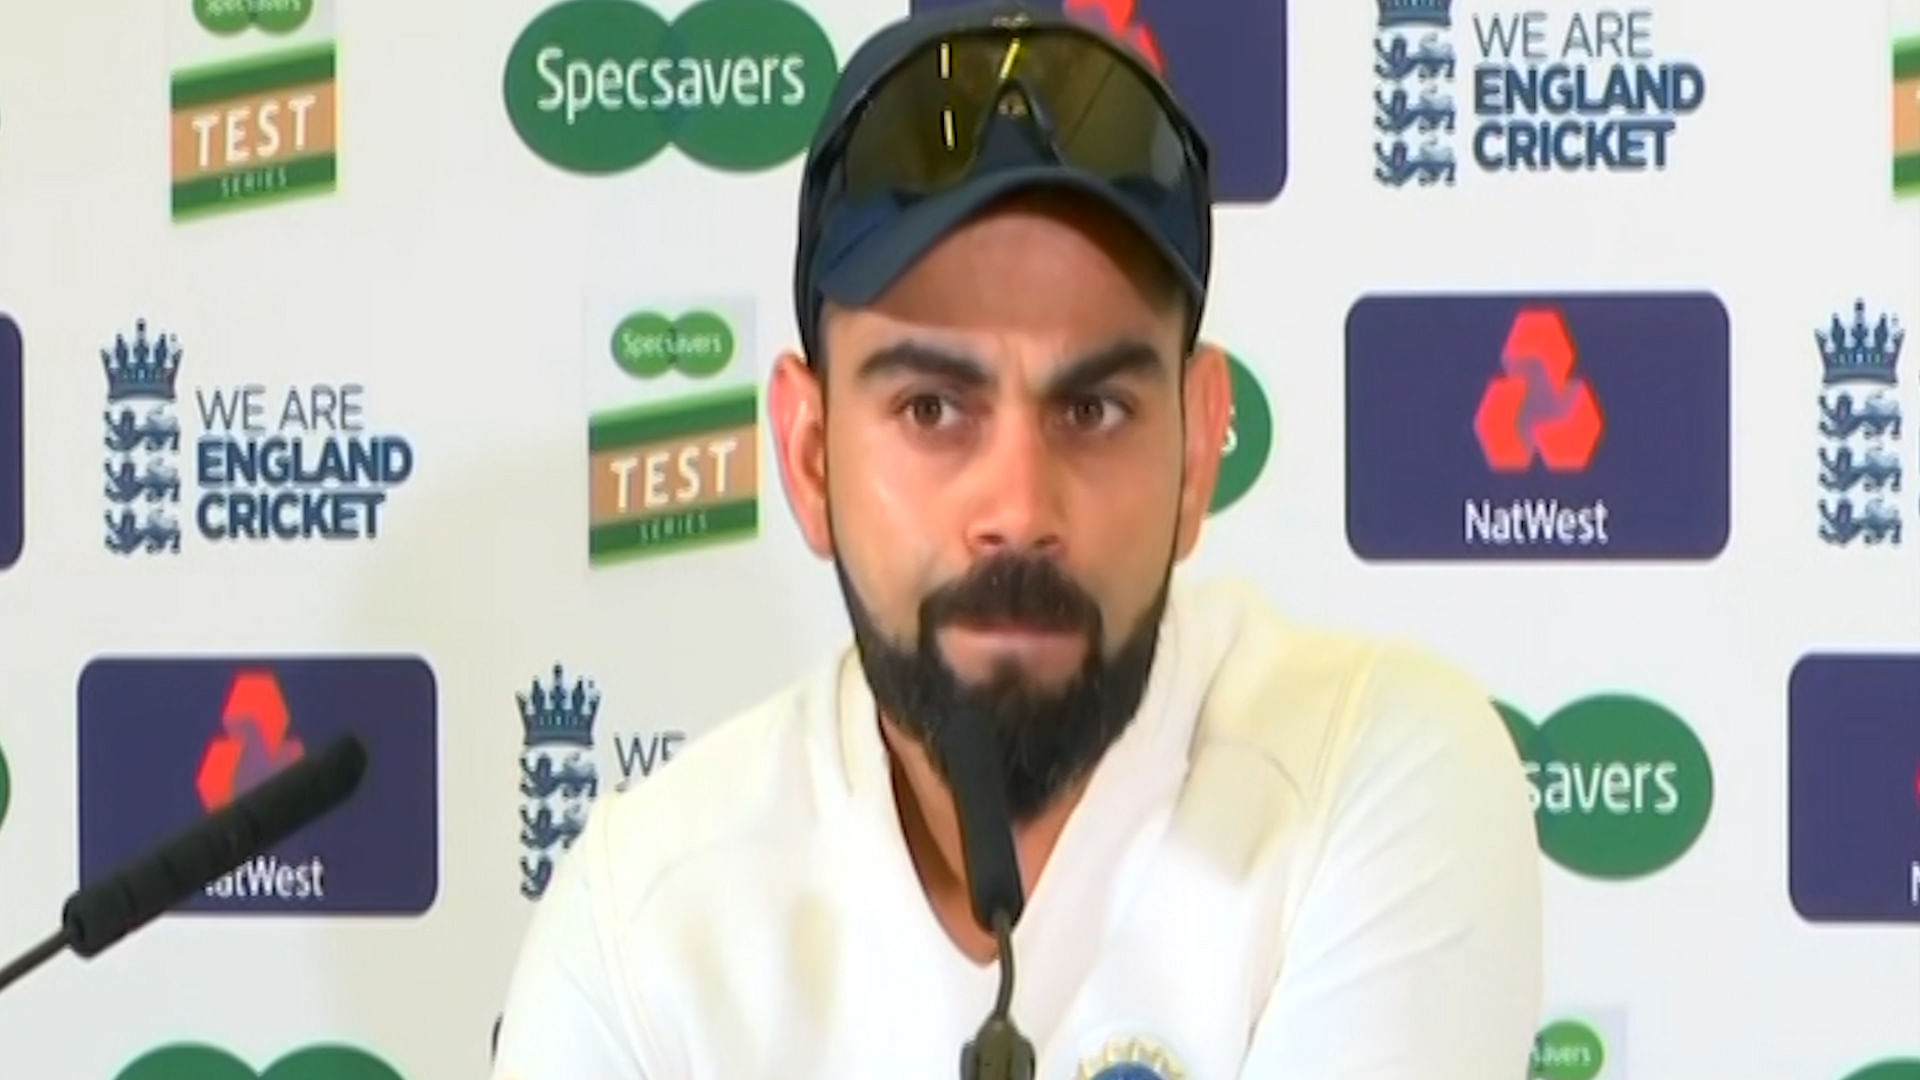 Virat Kohli speaks to the media ahead of the third Test between India and England.